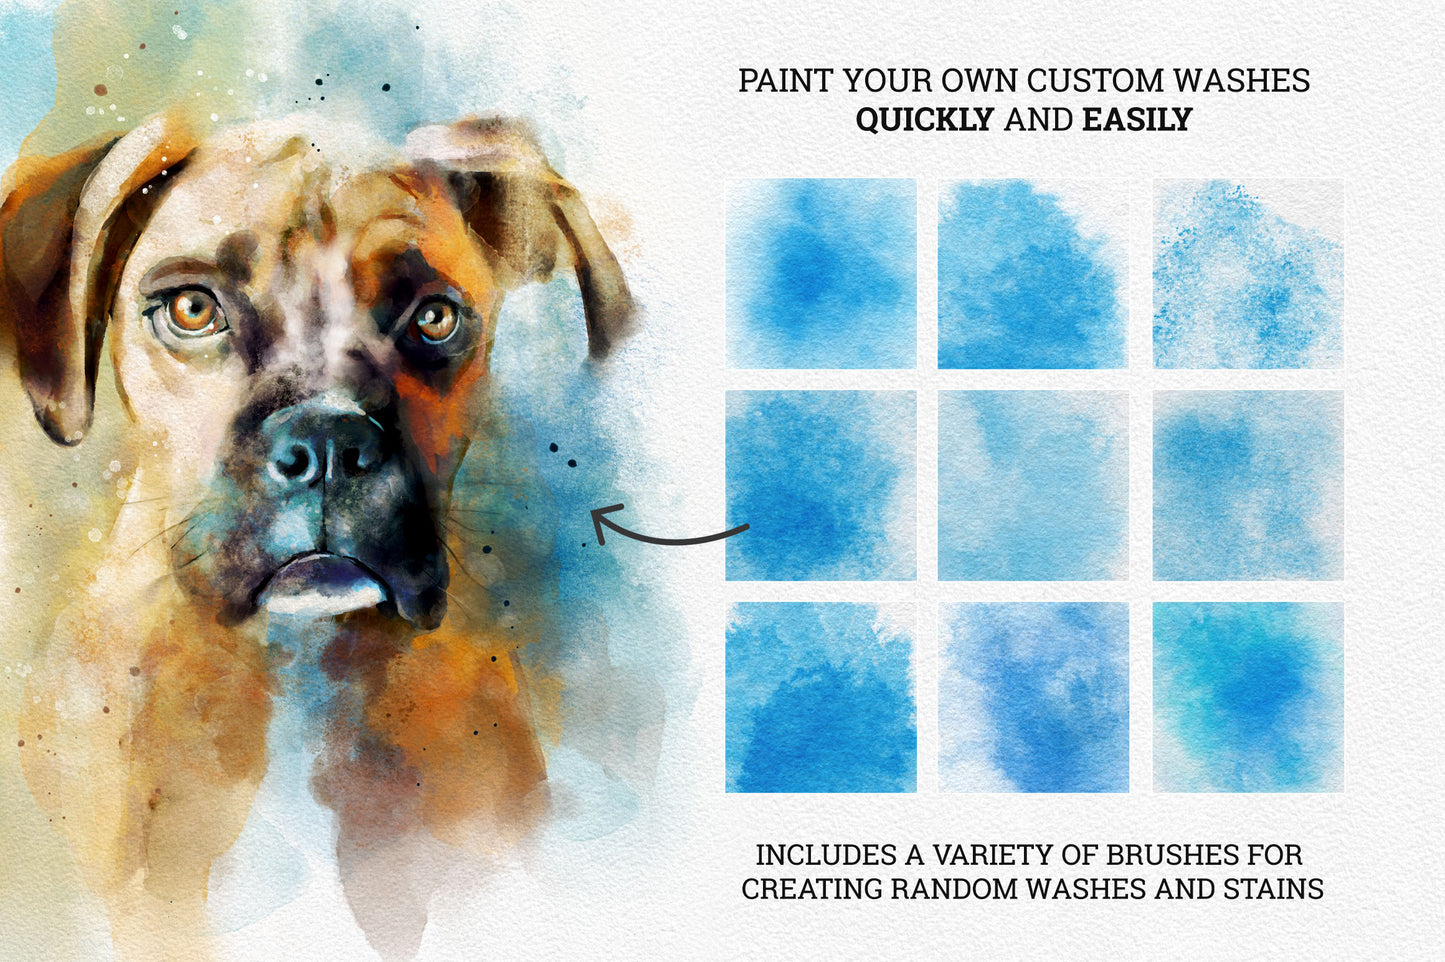 Master Watercolor Brushes